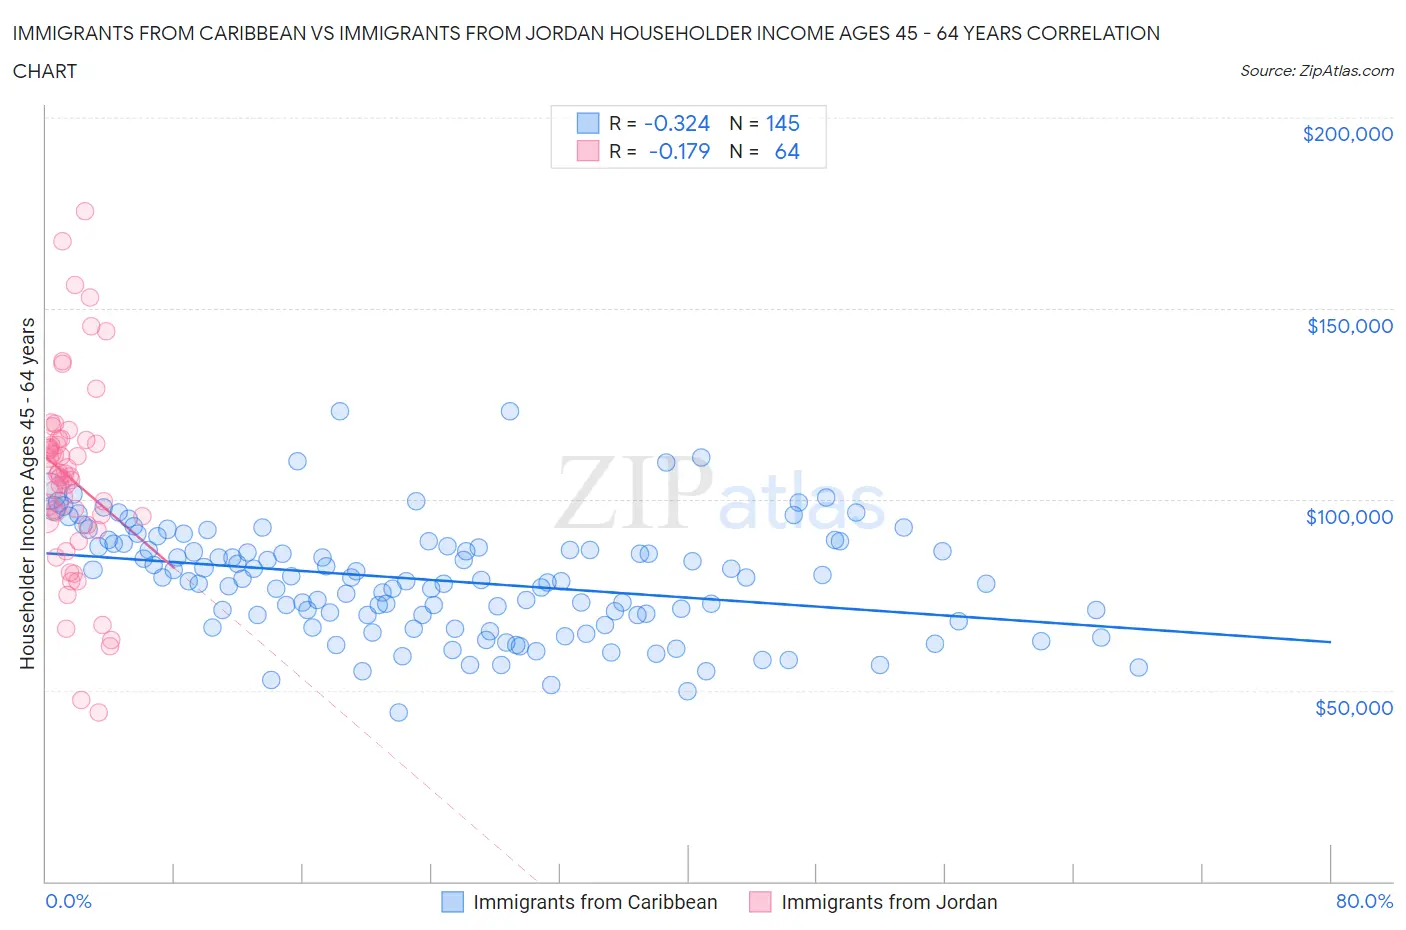 Immigrants from Caribbean vs Immigrants from Jordan Householder Income Ages 45 - 64 years